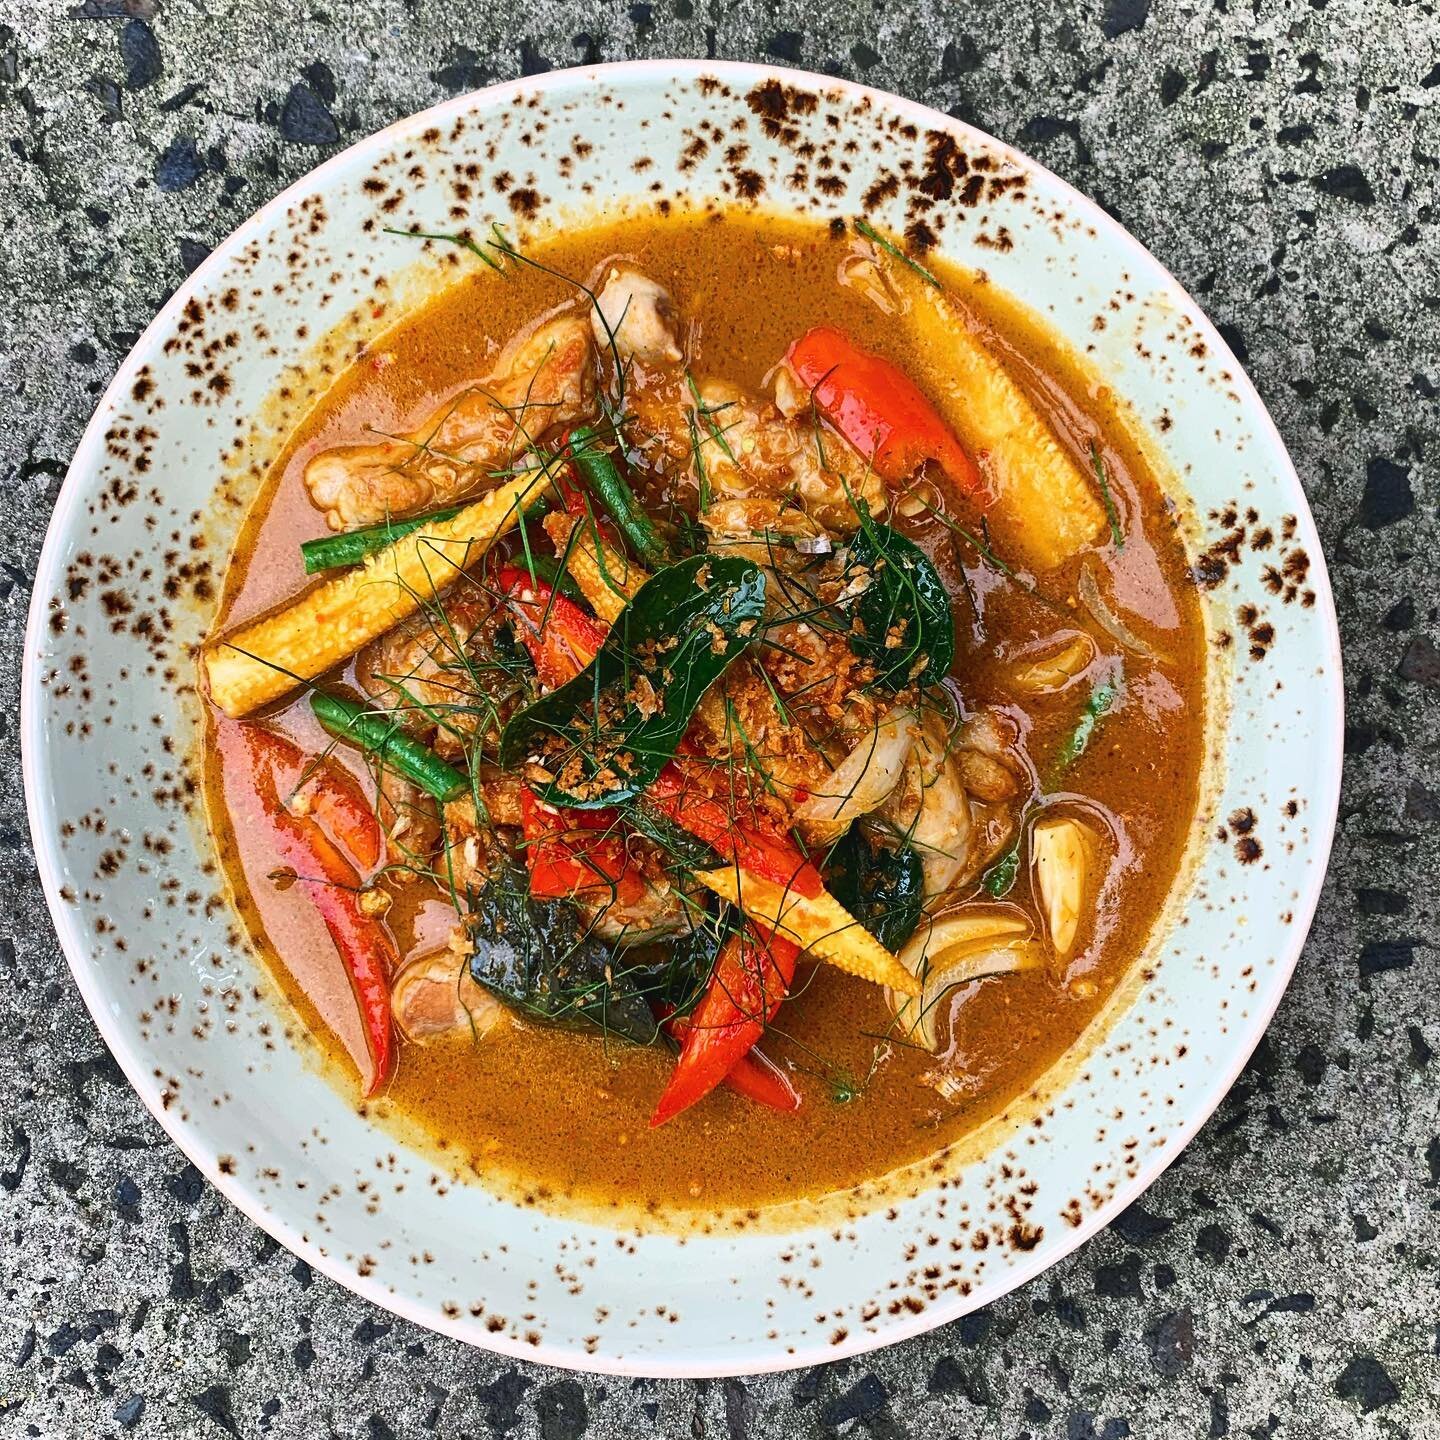 Spice up your next group get together with one of my cooking classes.. choose this classic northern style Jungle curry of chicken with wild ginger , baby corn &amp; Thai basil.

#southeastasian #thaifood #junglecurry #spicy #virtualcookingclass #adam